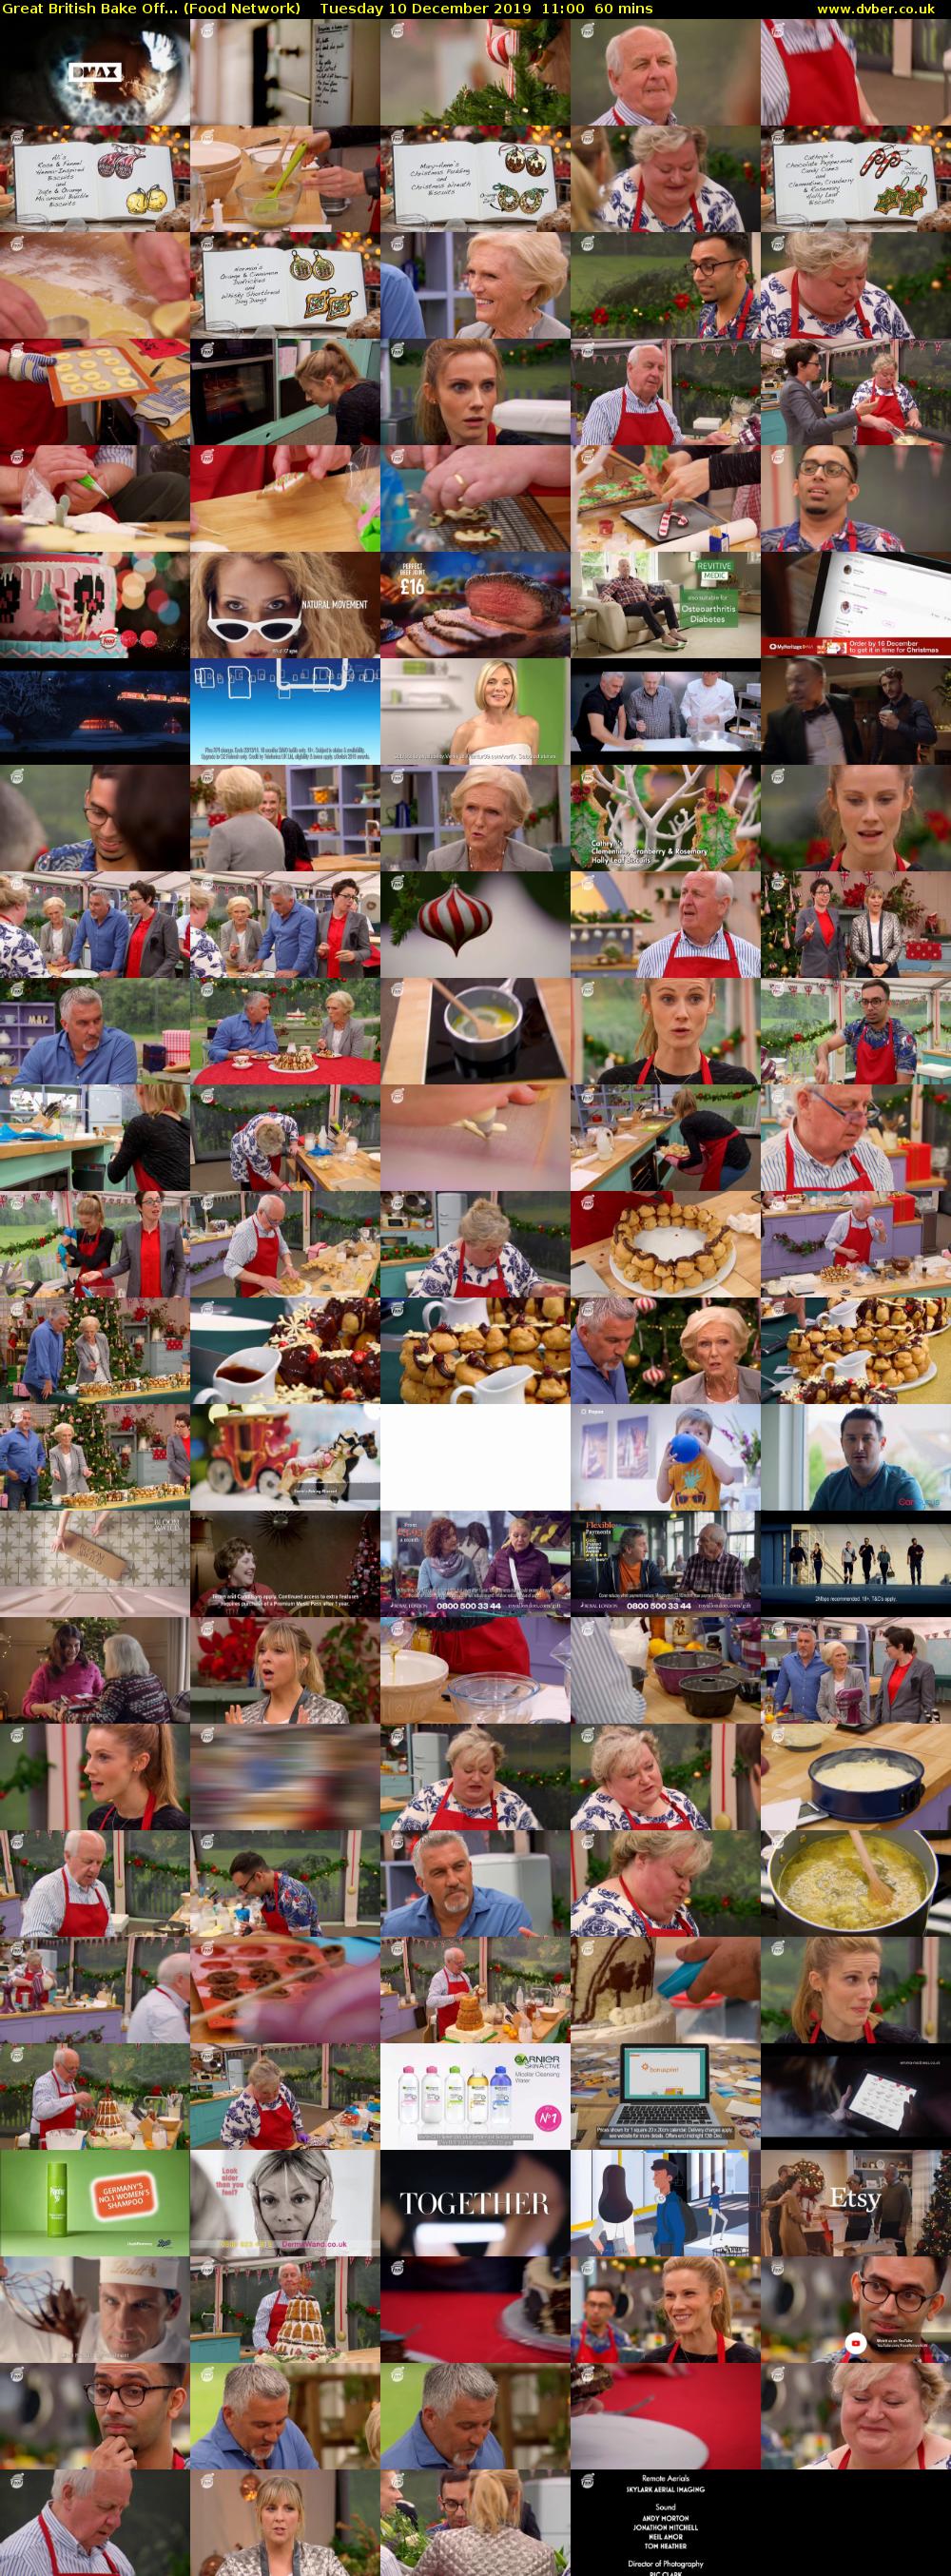 Great British Bake Off... (Food Network) Tuesday 10 December 2019 11:00 - 12:00